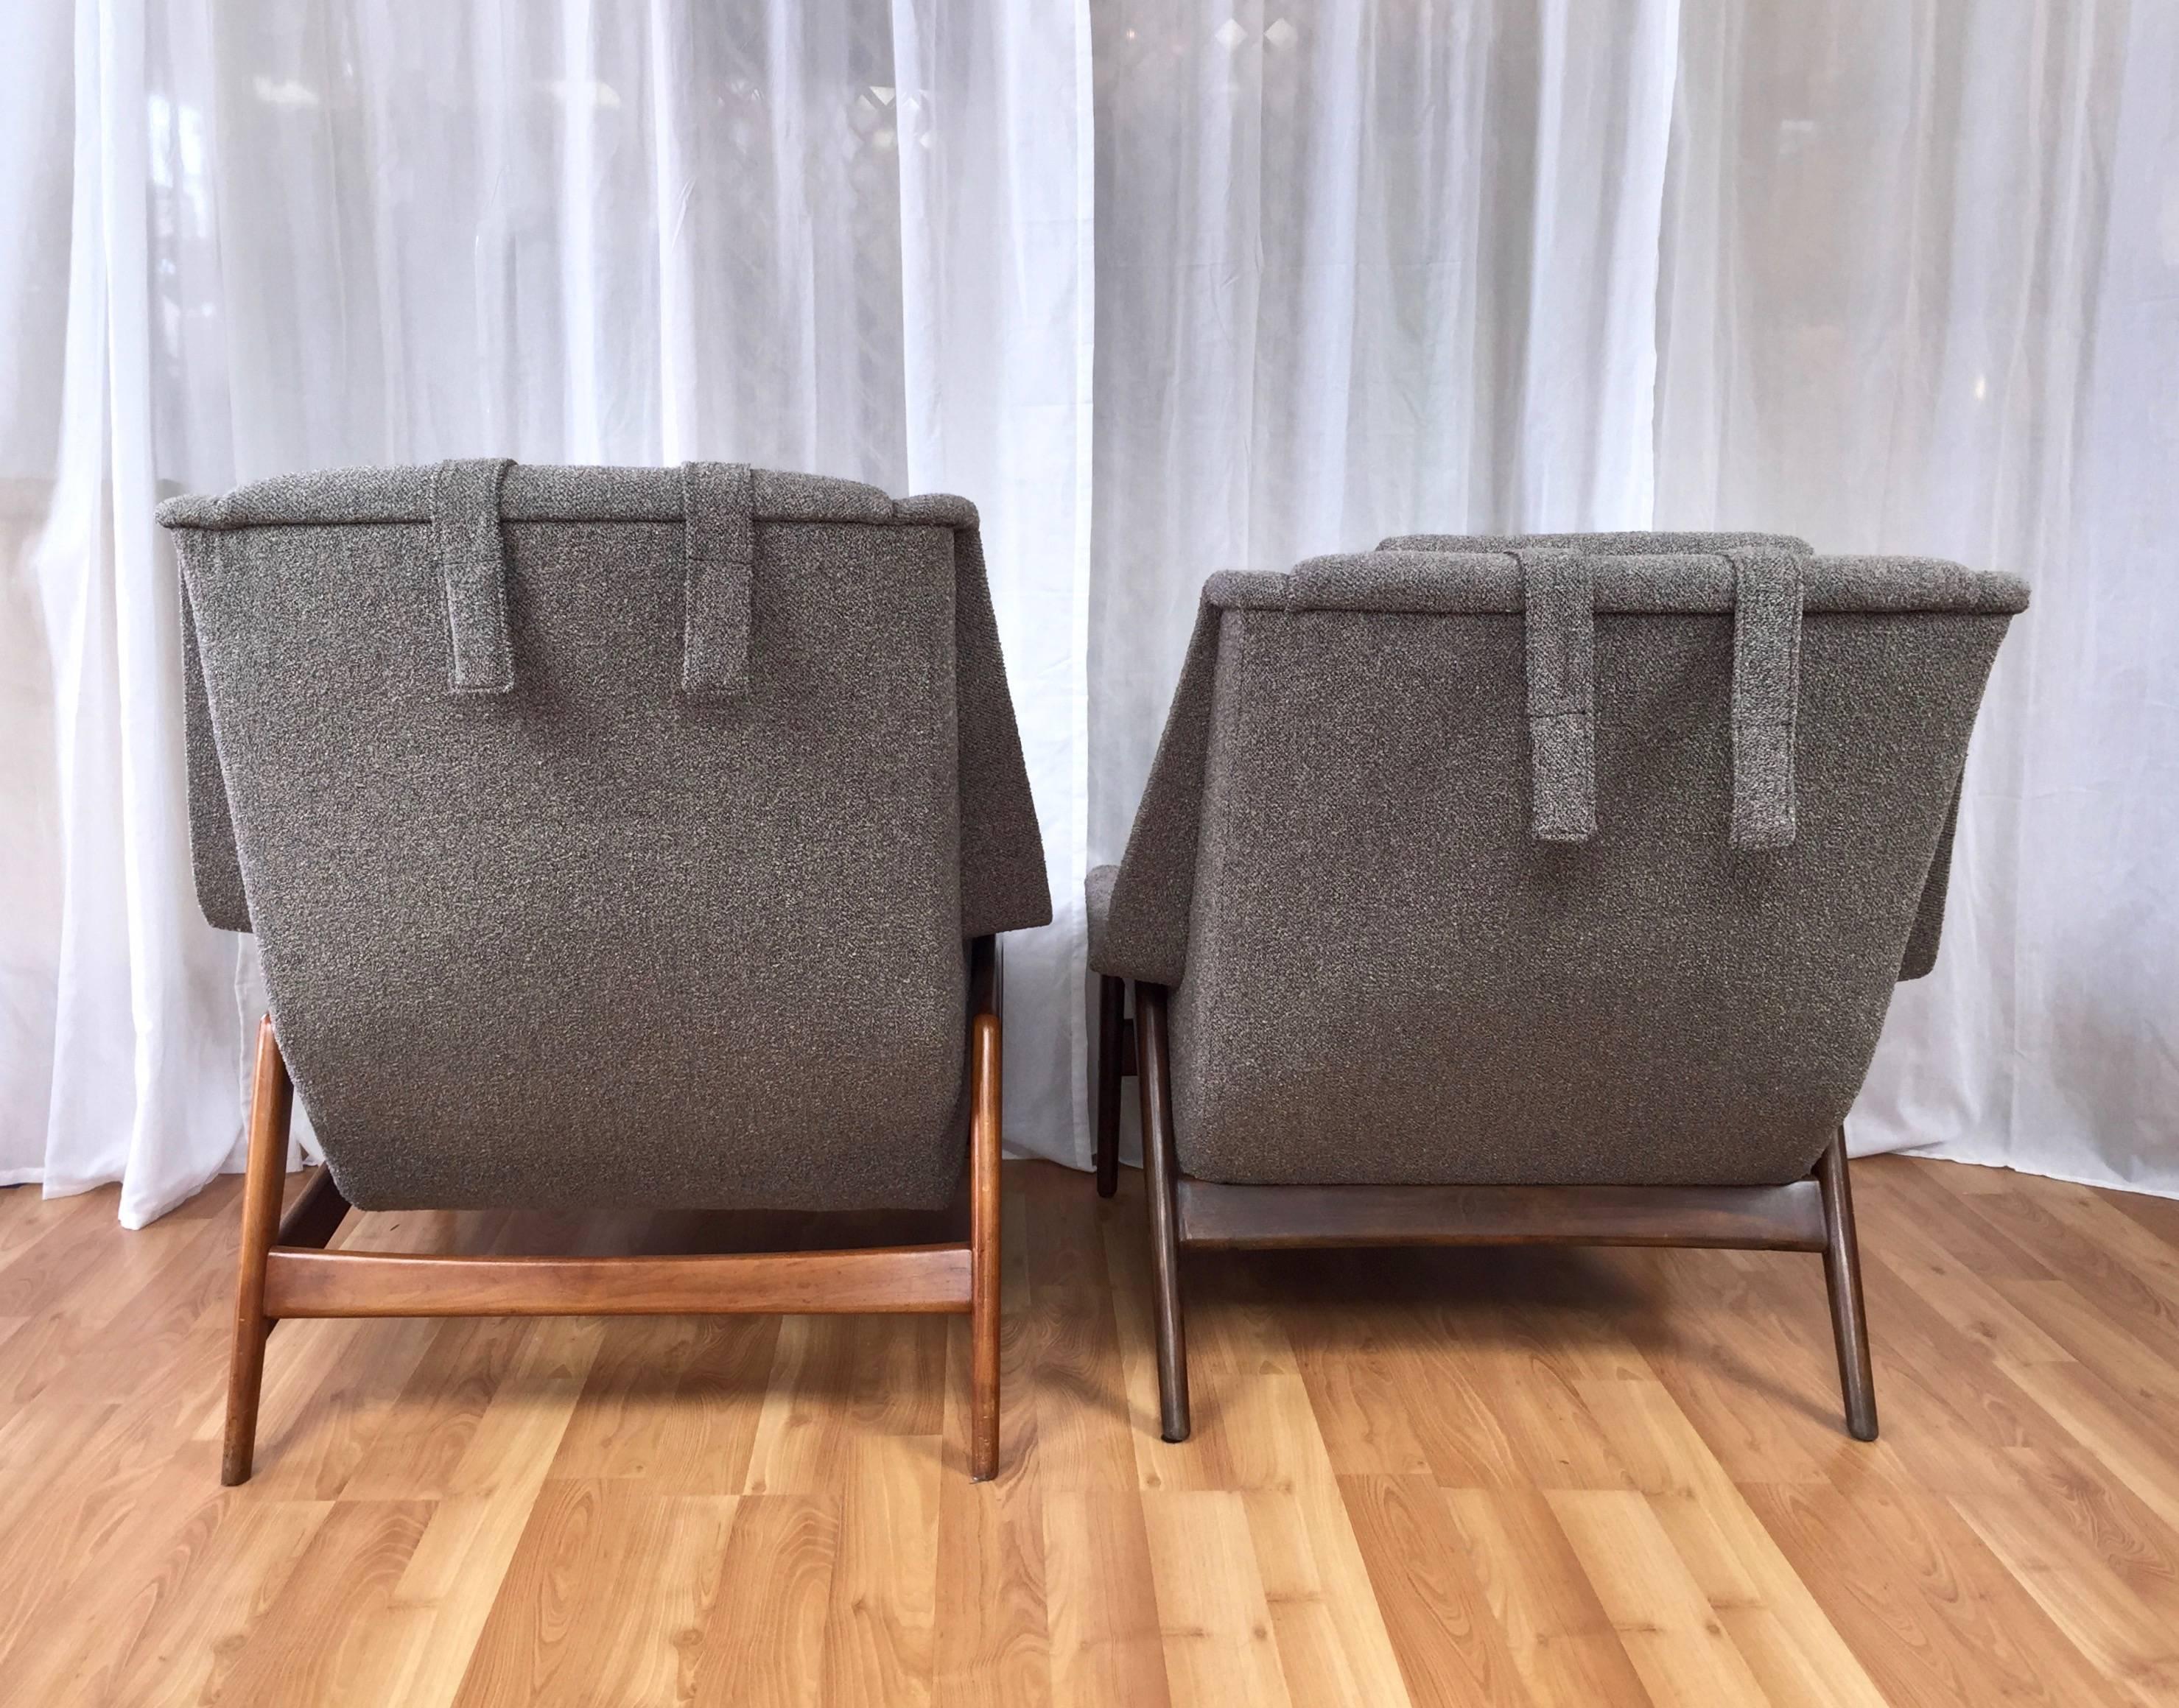 Scandinavian Modern 3 Piece Set of Folke Ohlsson for DUX Lounge Chairs and Ottoman *SATURDAY SALE